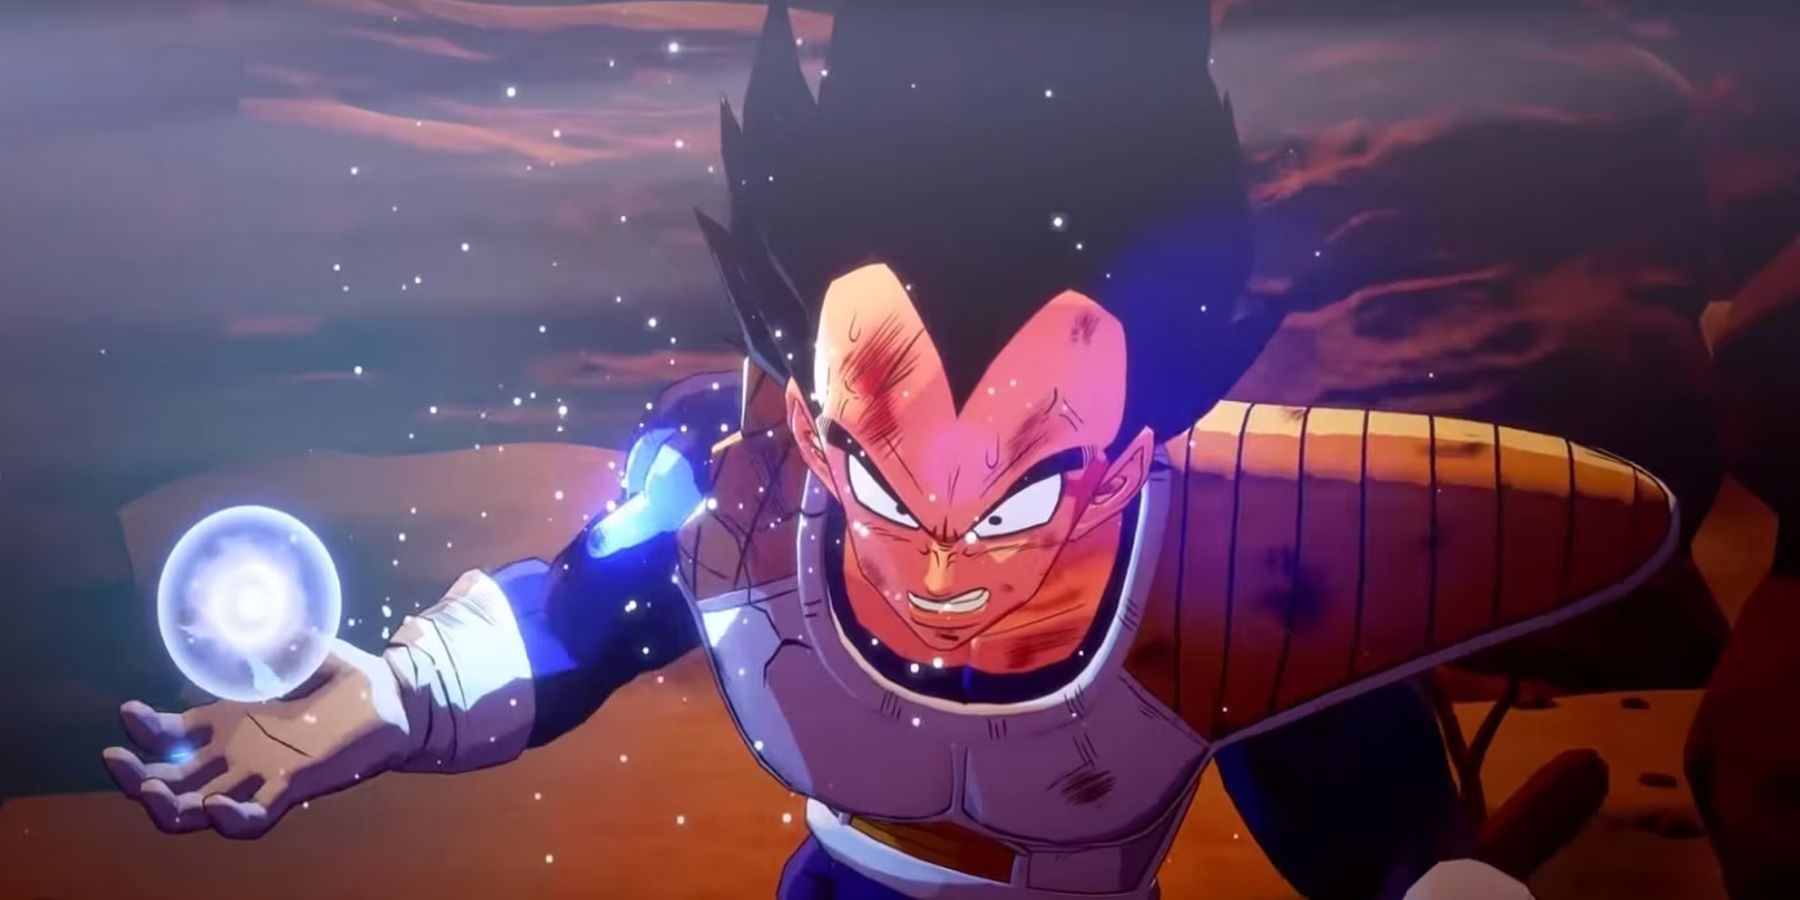 It's Time for a 'Dragon Ball Z- Vegeta' Game